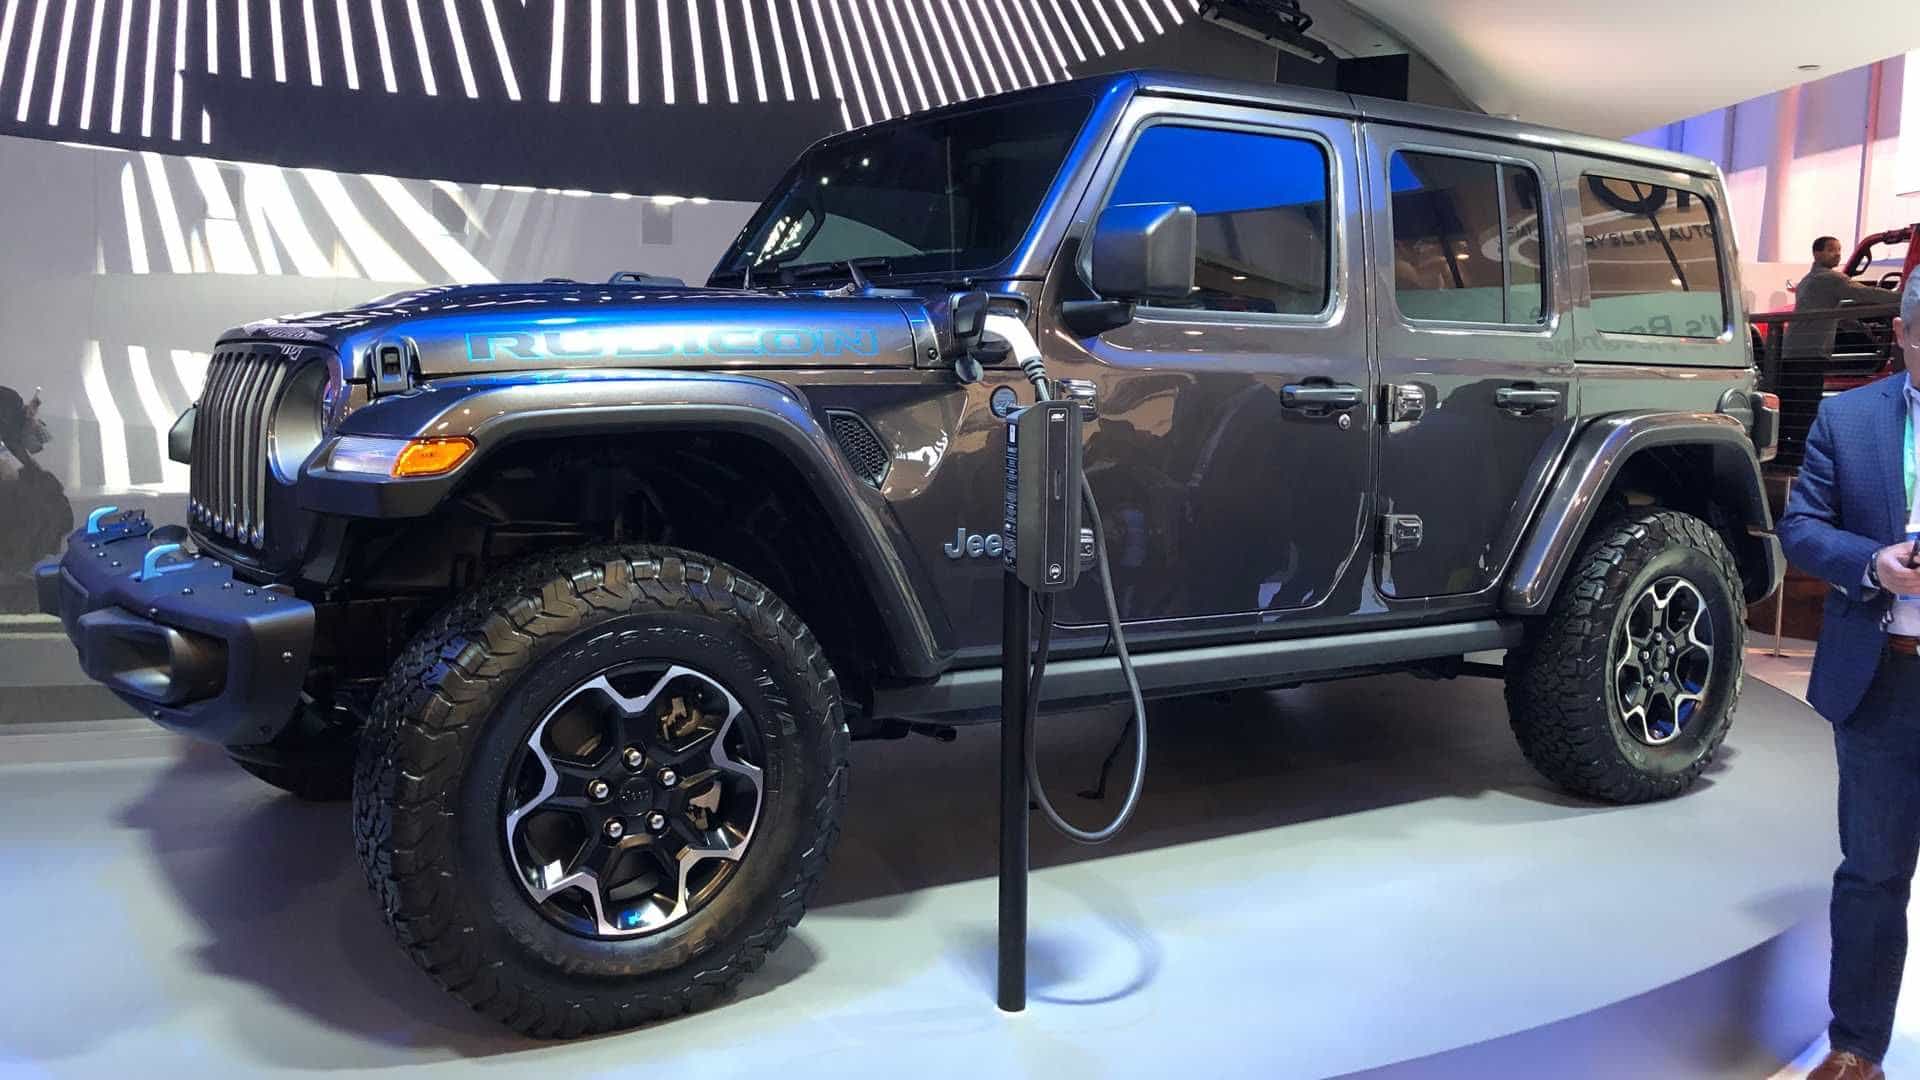 Wrangler Plug-In Hybrid Dubbed 4XE Will Hit Showrooms This Year | Jk-forum